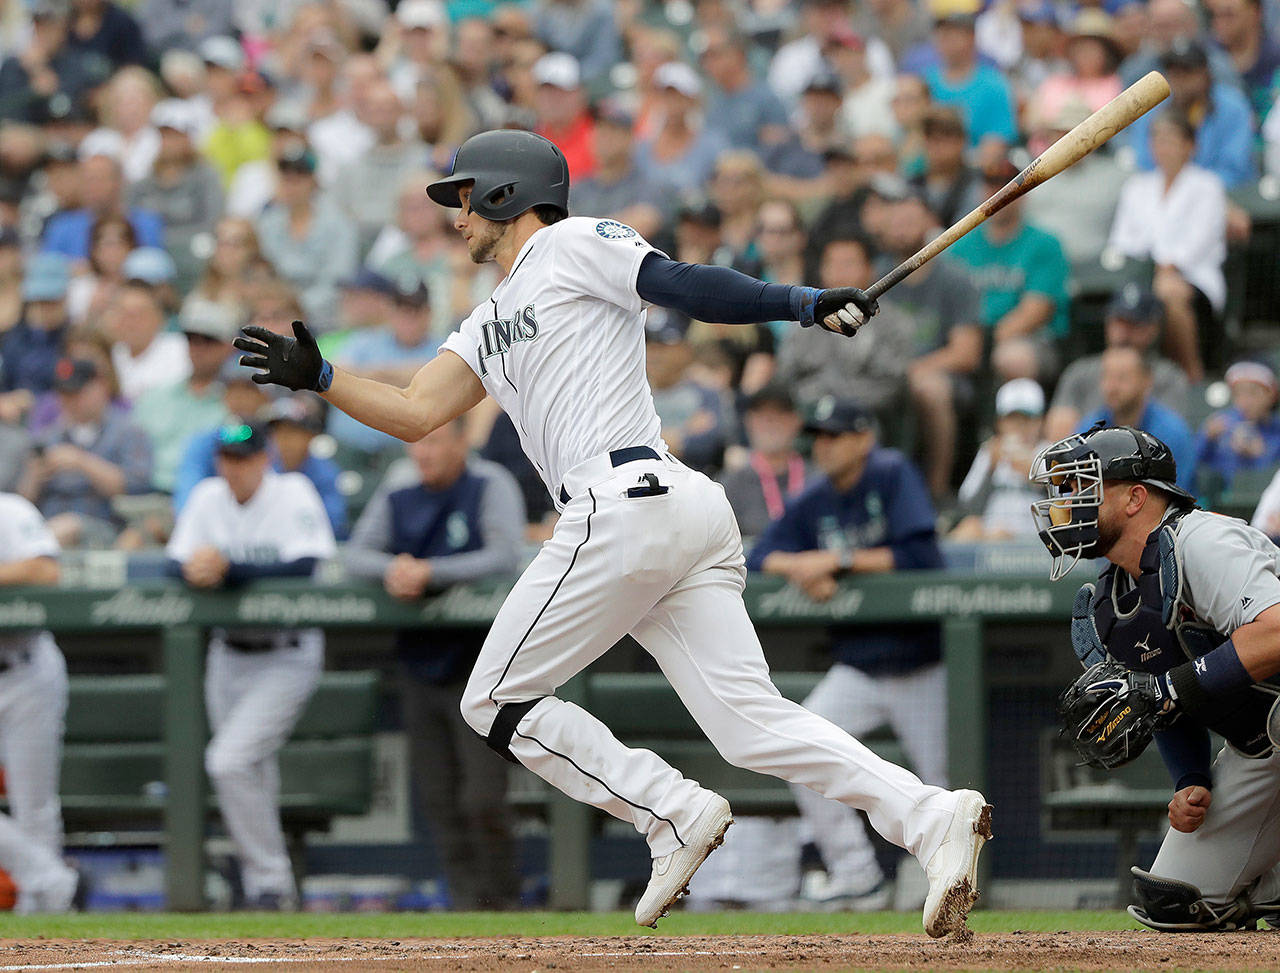 Seattle’s Ryan Court socks an RBI single for his first major-league hit during the Mariners’ 8-1 win over Detroit on Saturday in Seattle. (AP Photo/Ted S. Warren)